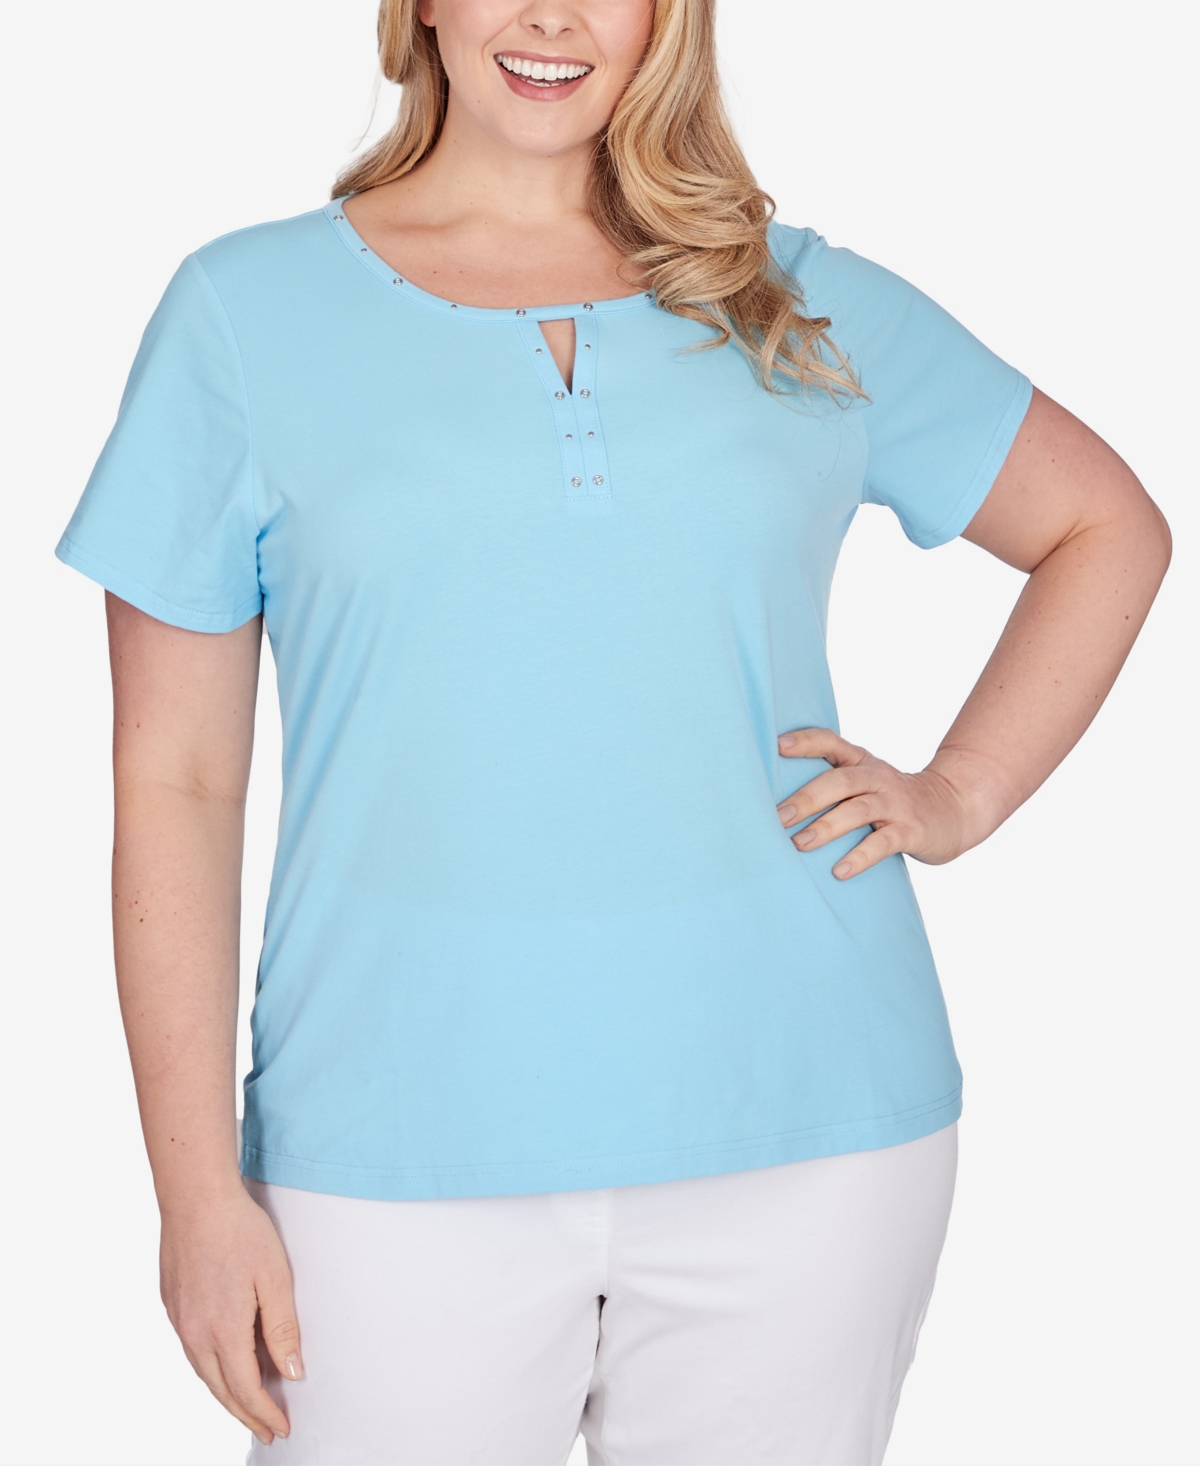 Plus Size Feeling The Lime Short Sleeve Top - Sky Blue